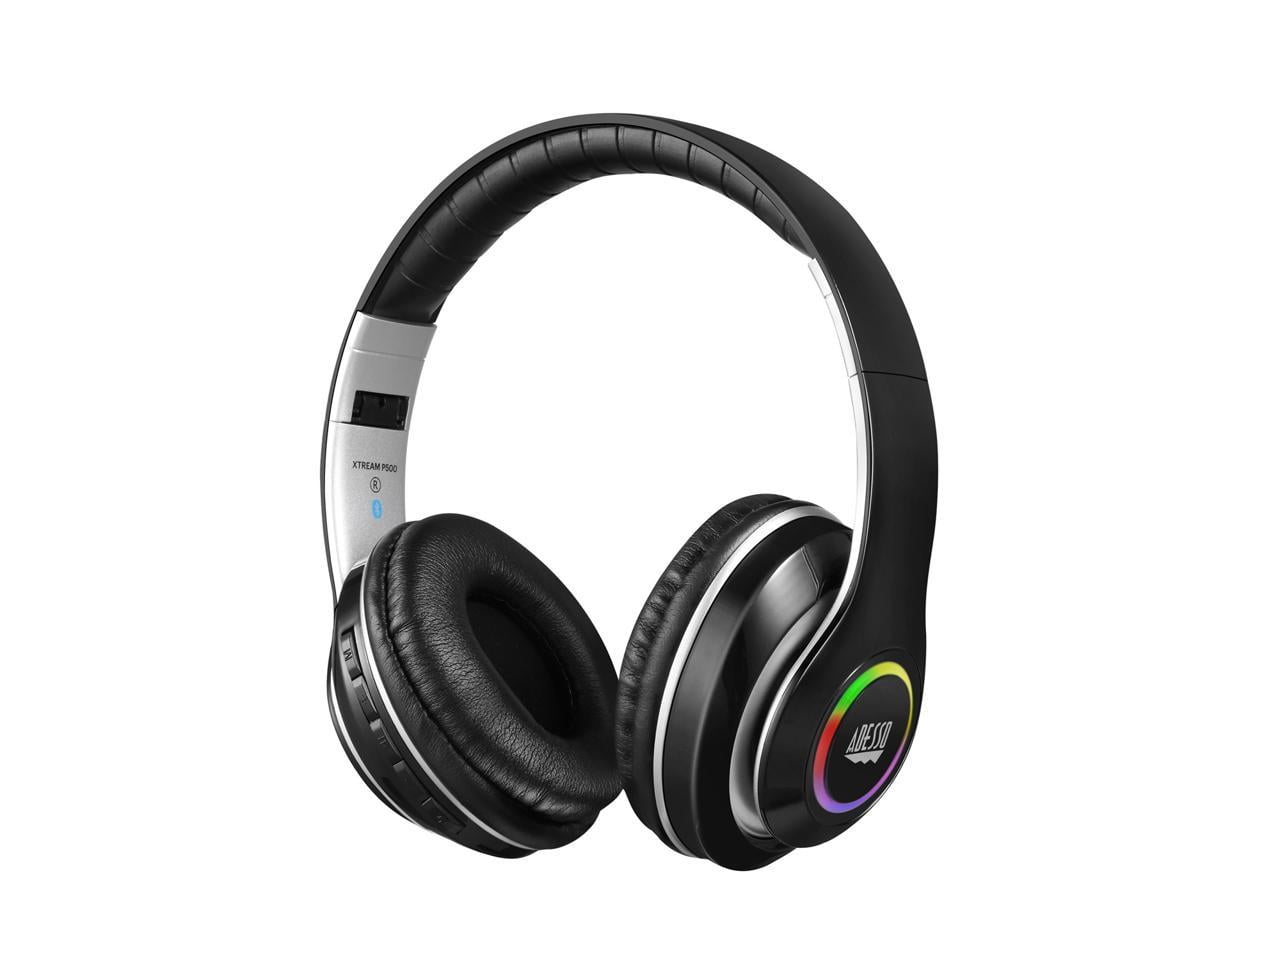 Picture of Adesso XTREAM P500 Xtream P500 Bluetooth Stereo Headphone with Build-in Microphone